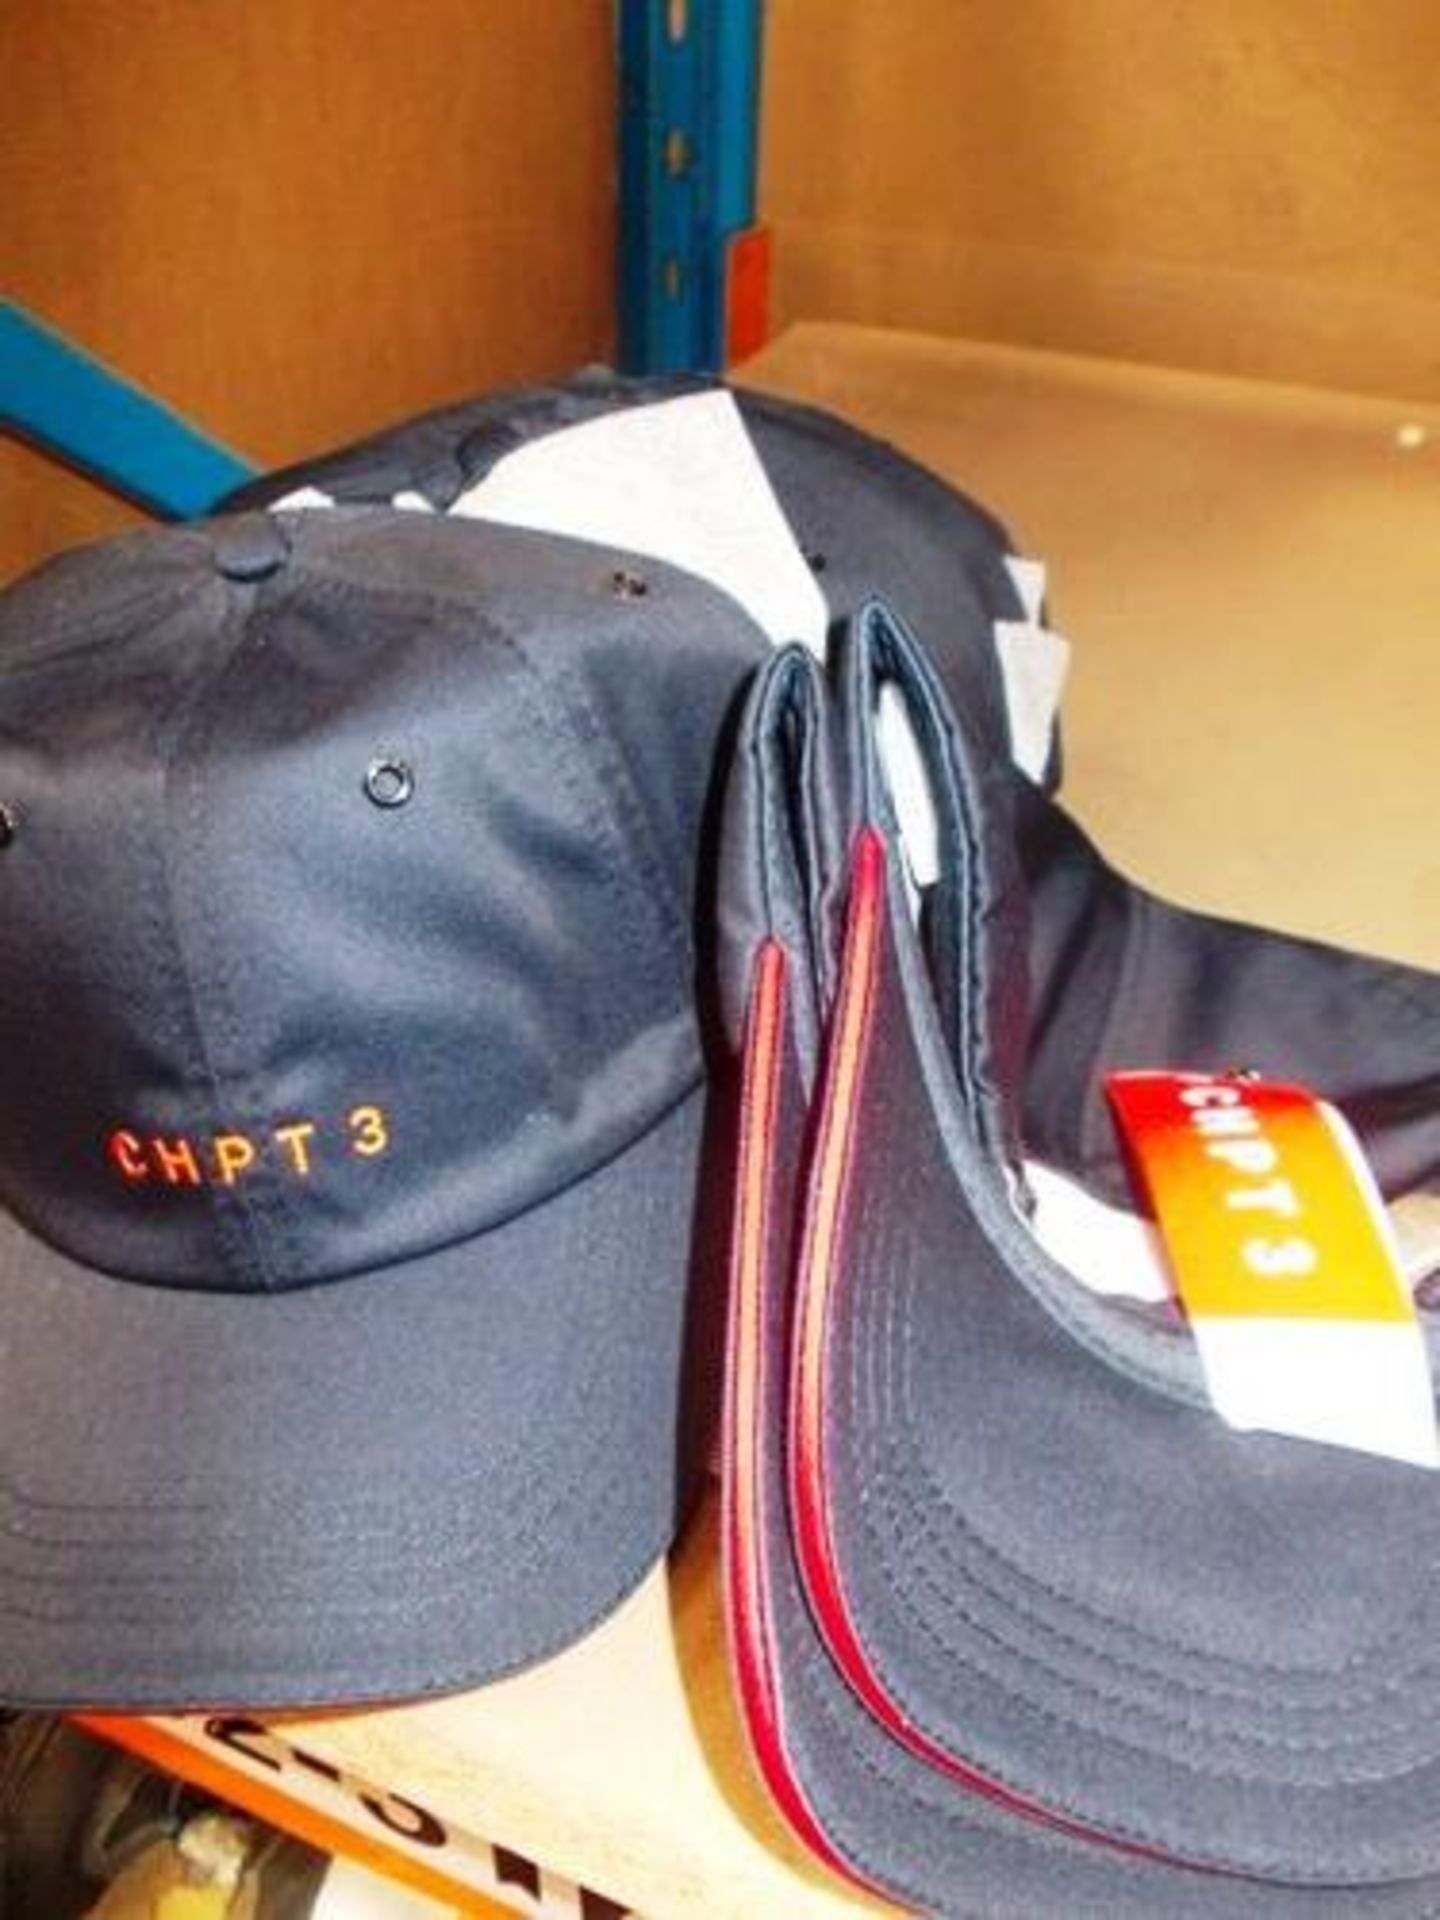 13 x CHPT baseball caps, one size - New with tags (E2B)